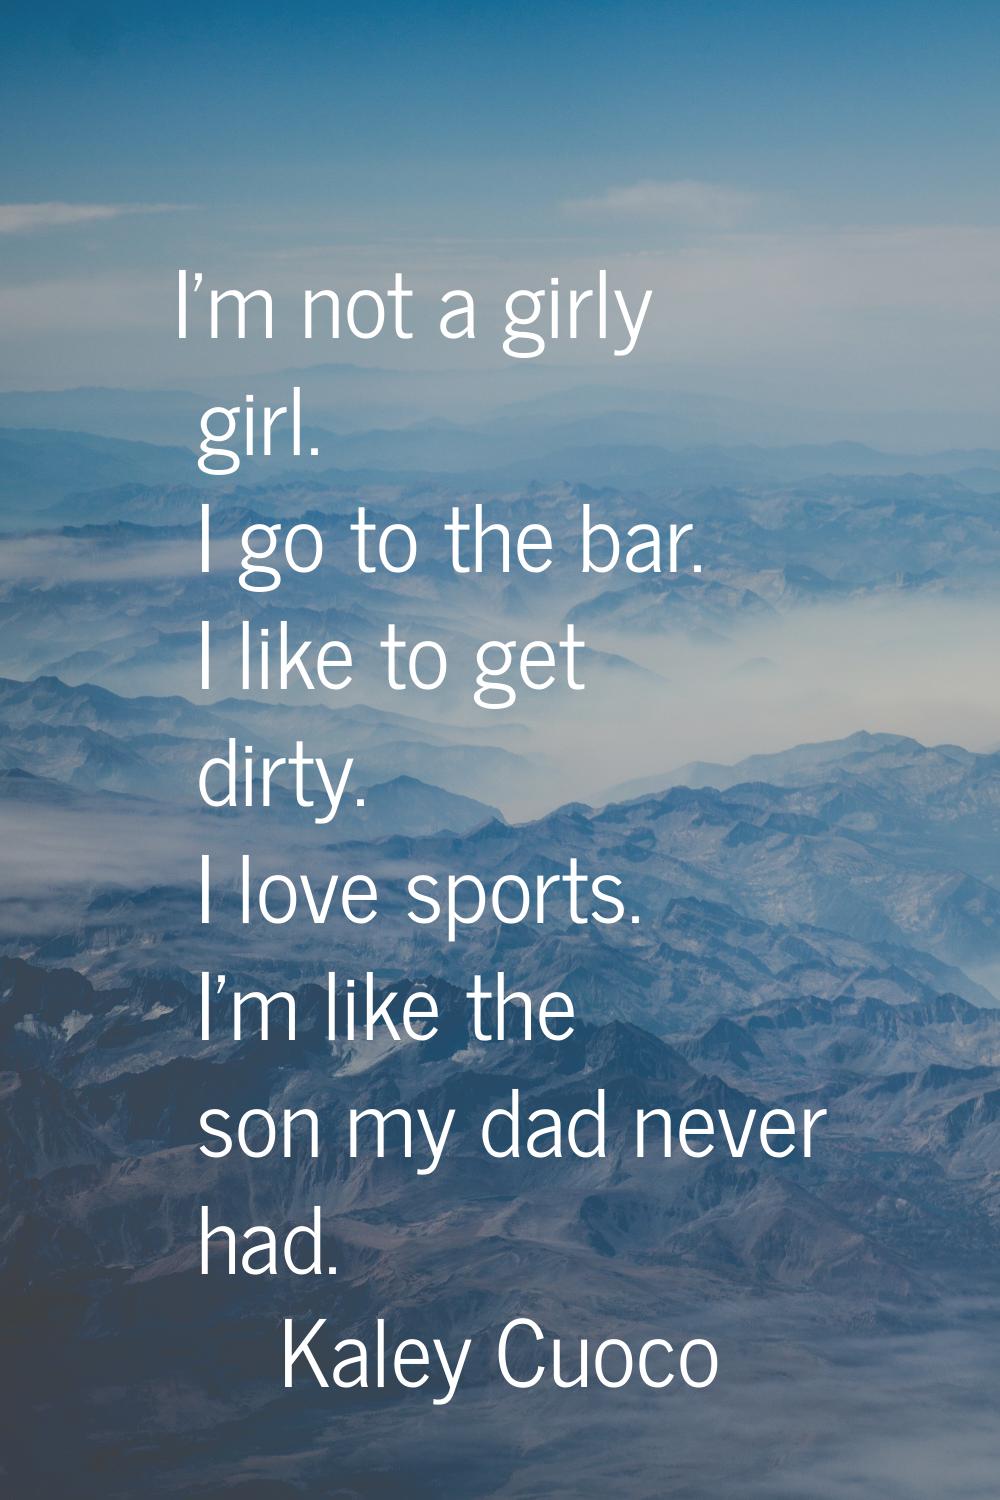 I'm not a girly girl. I go to the bar. I like to get dirty. I love sports. I'm like the son my dad 